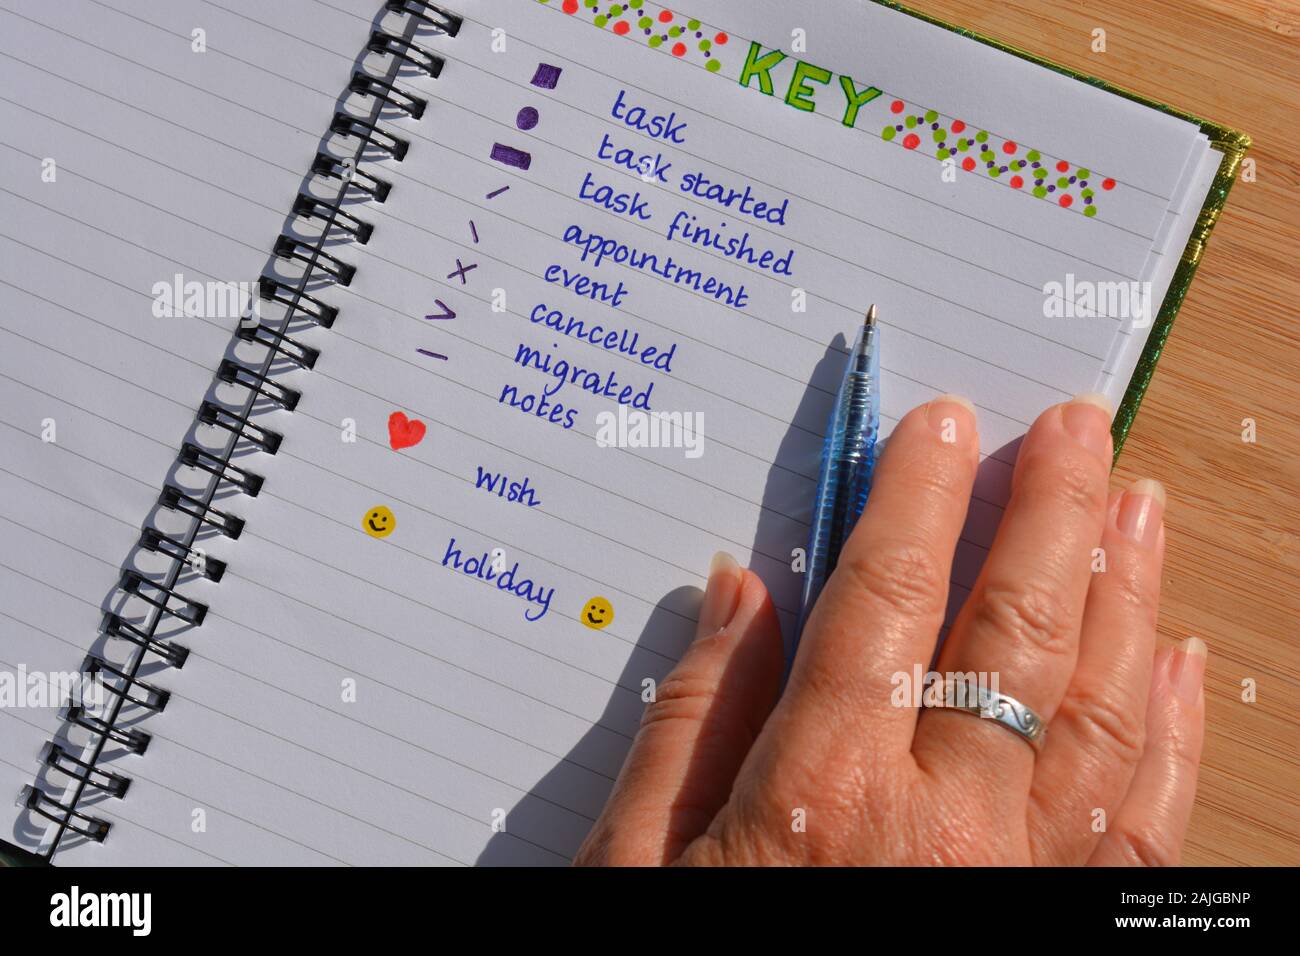 Woman writing in a bullet journal, pen in hand Stock Photo